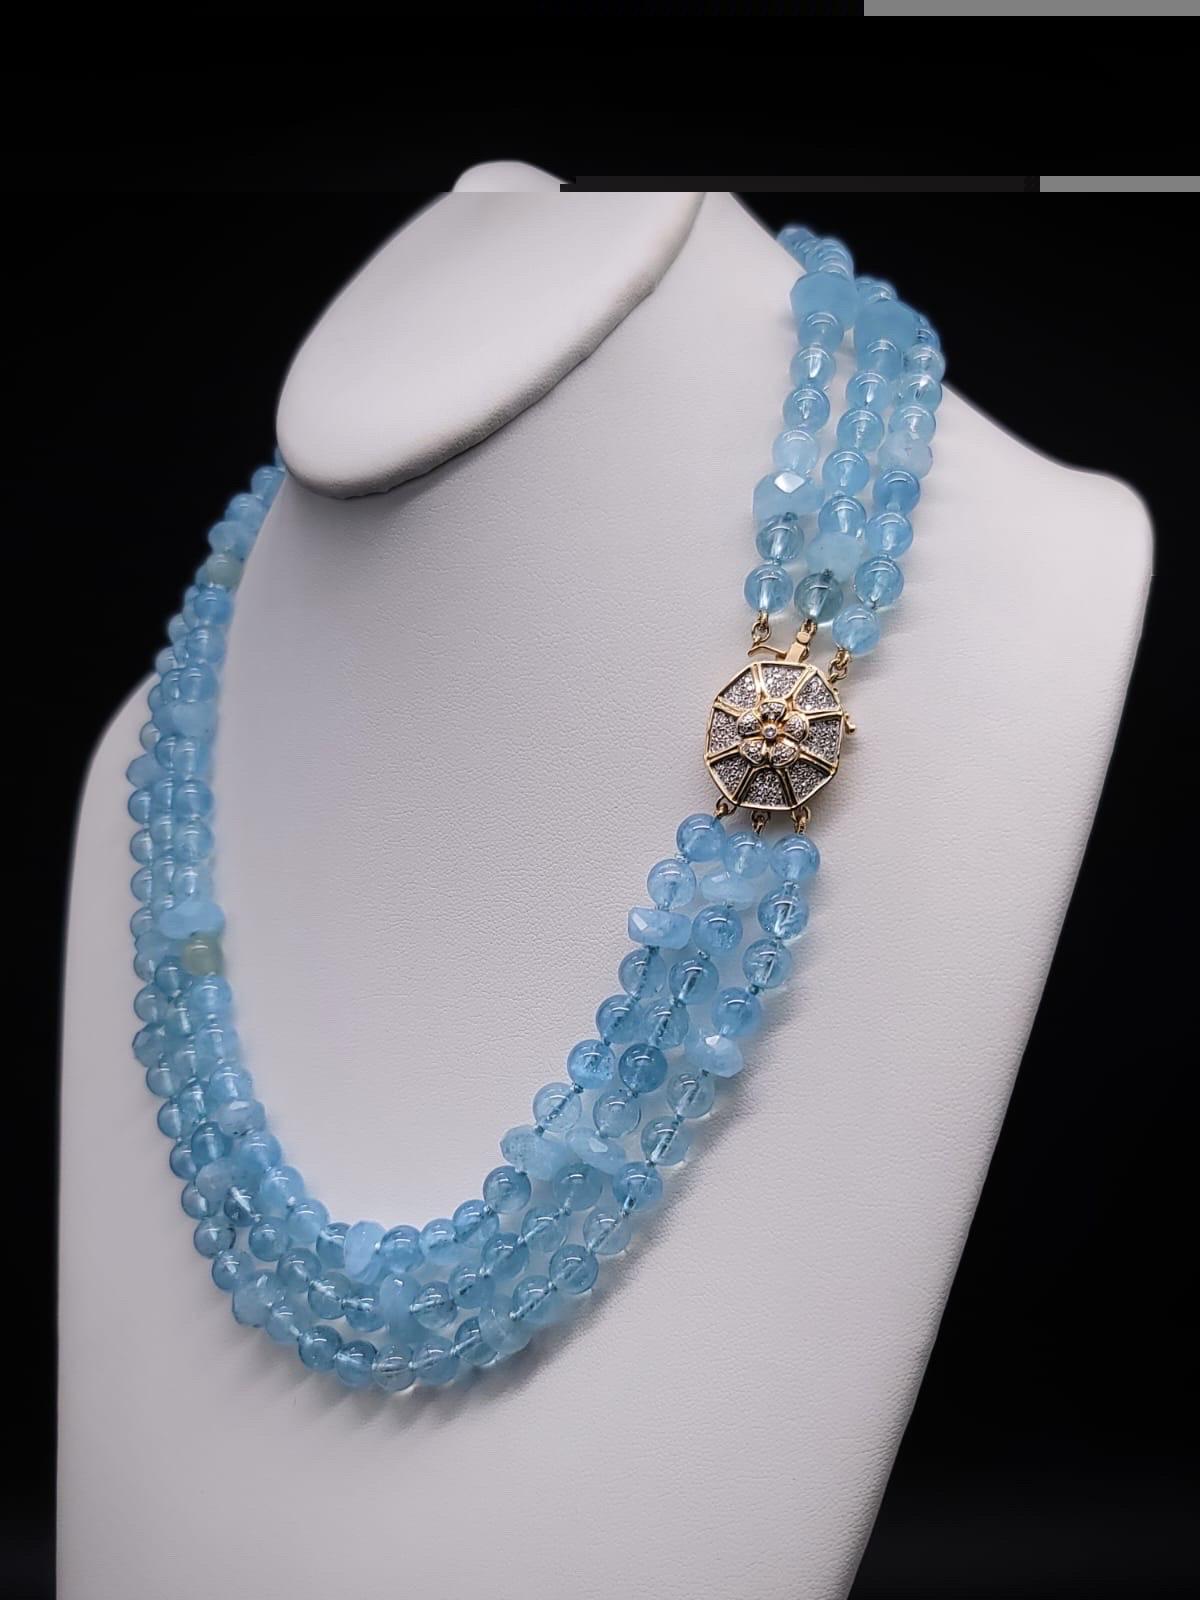 A.Jeschel AAA Aquamarine necklace with a 14k Gold Diamond clasp. 4